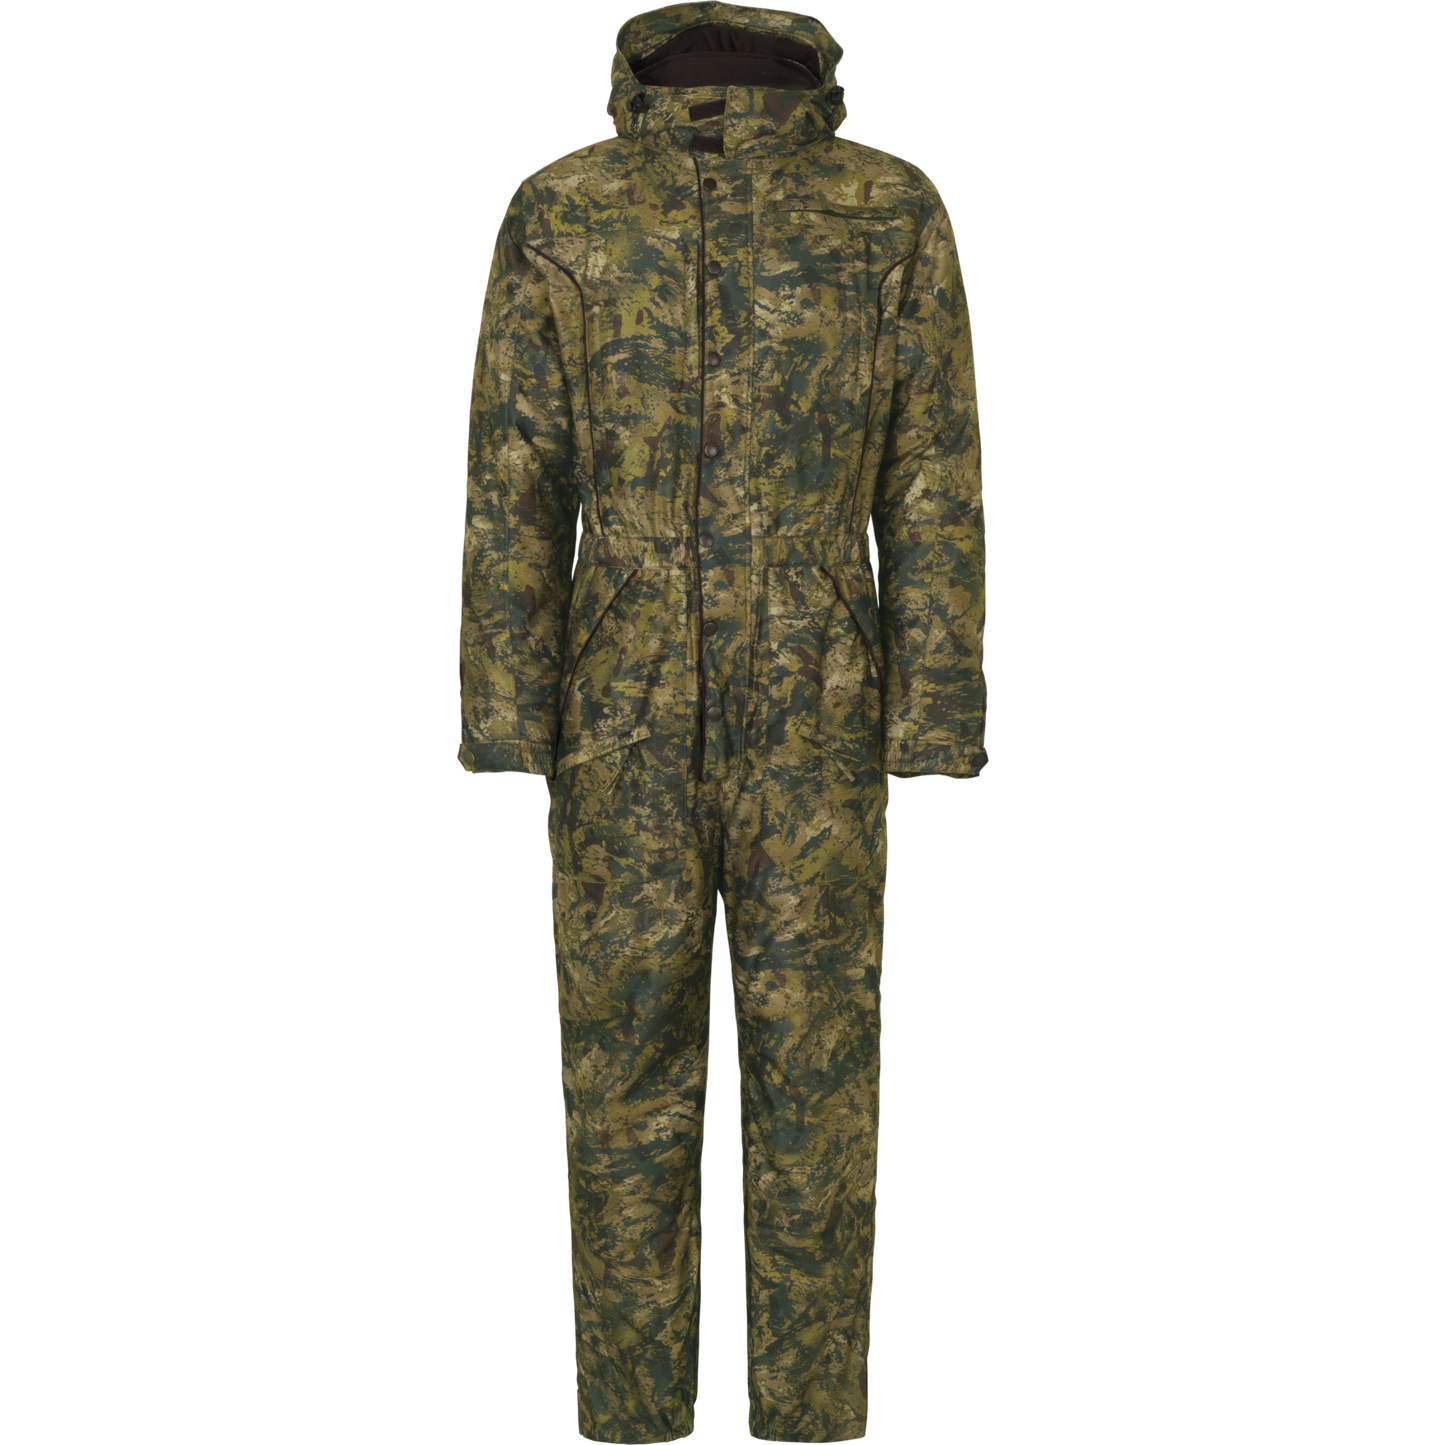 Outthere camo onepiece